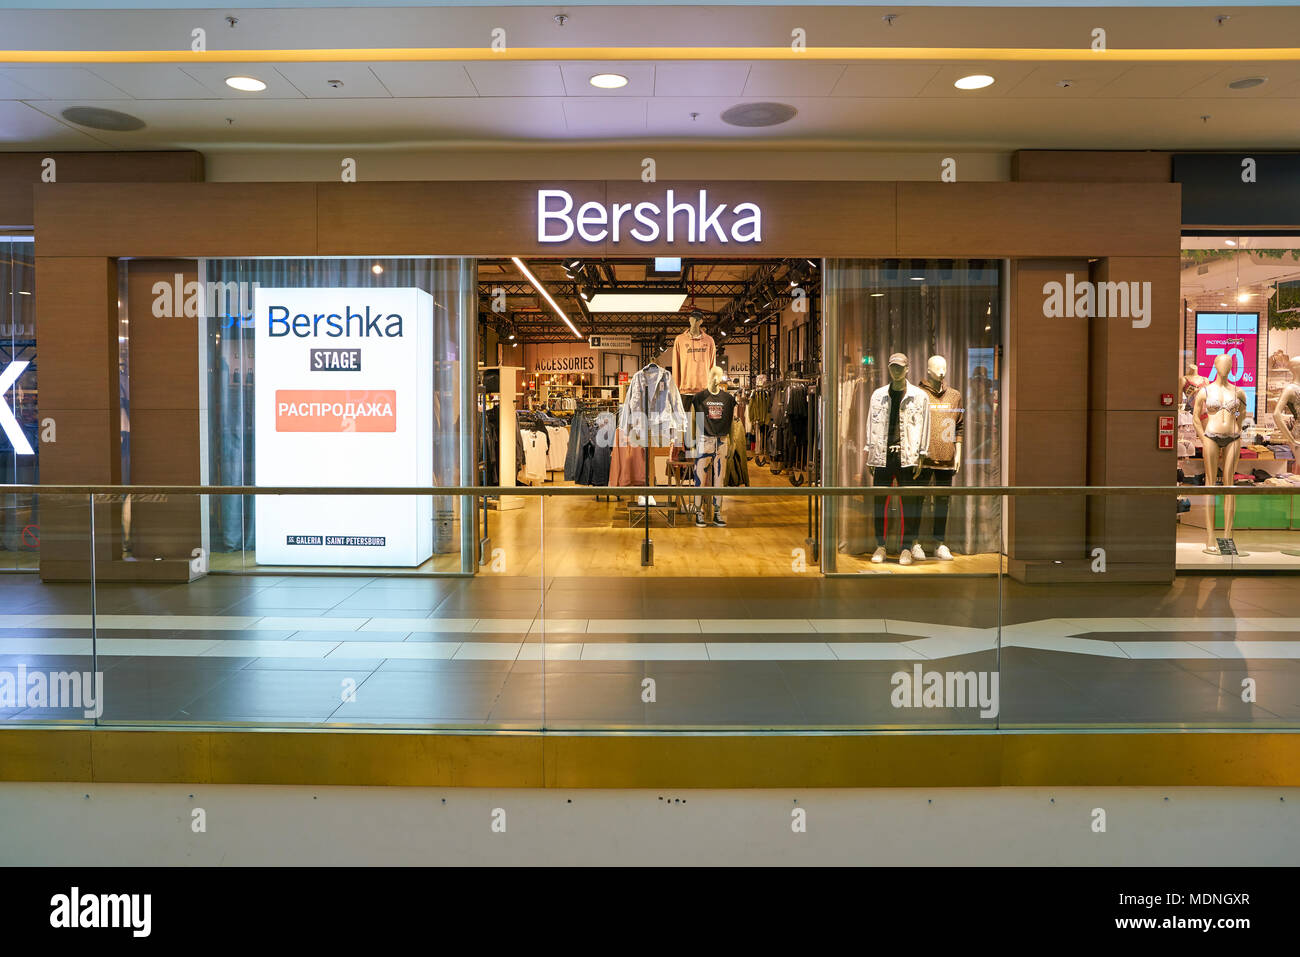 Bershka Shopping Center High Resolution Stock Photography and Images - Alamy